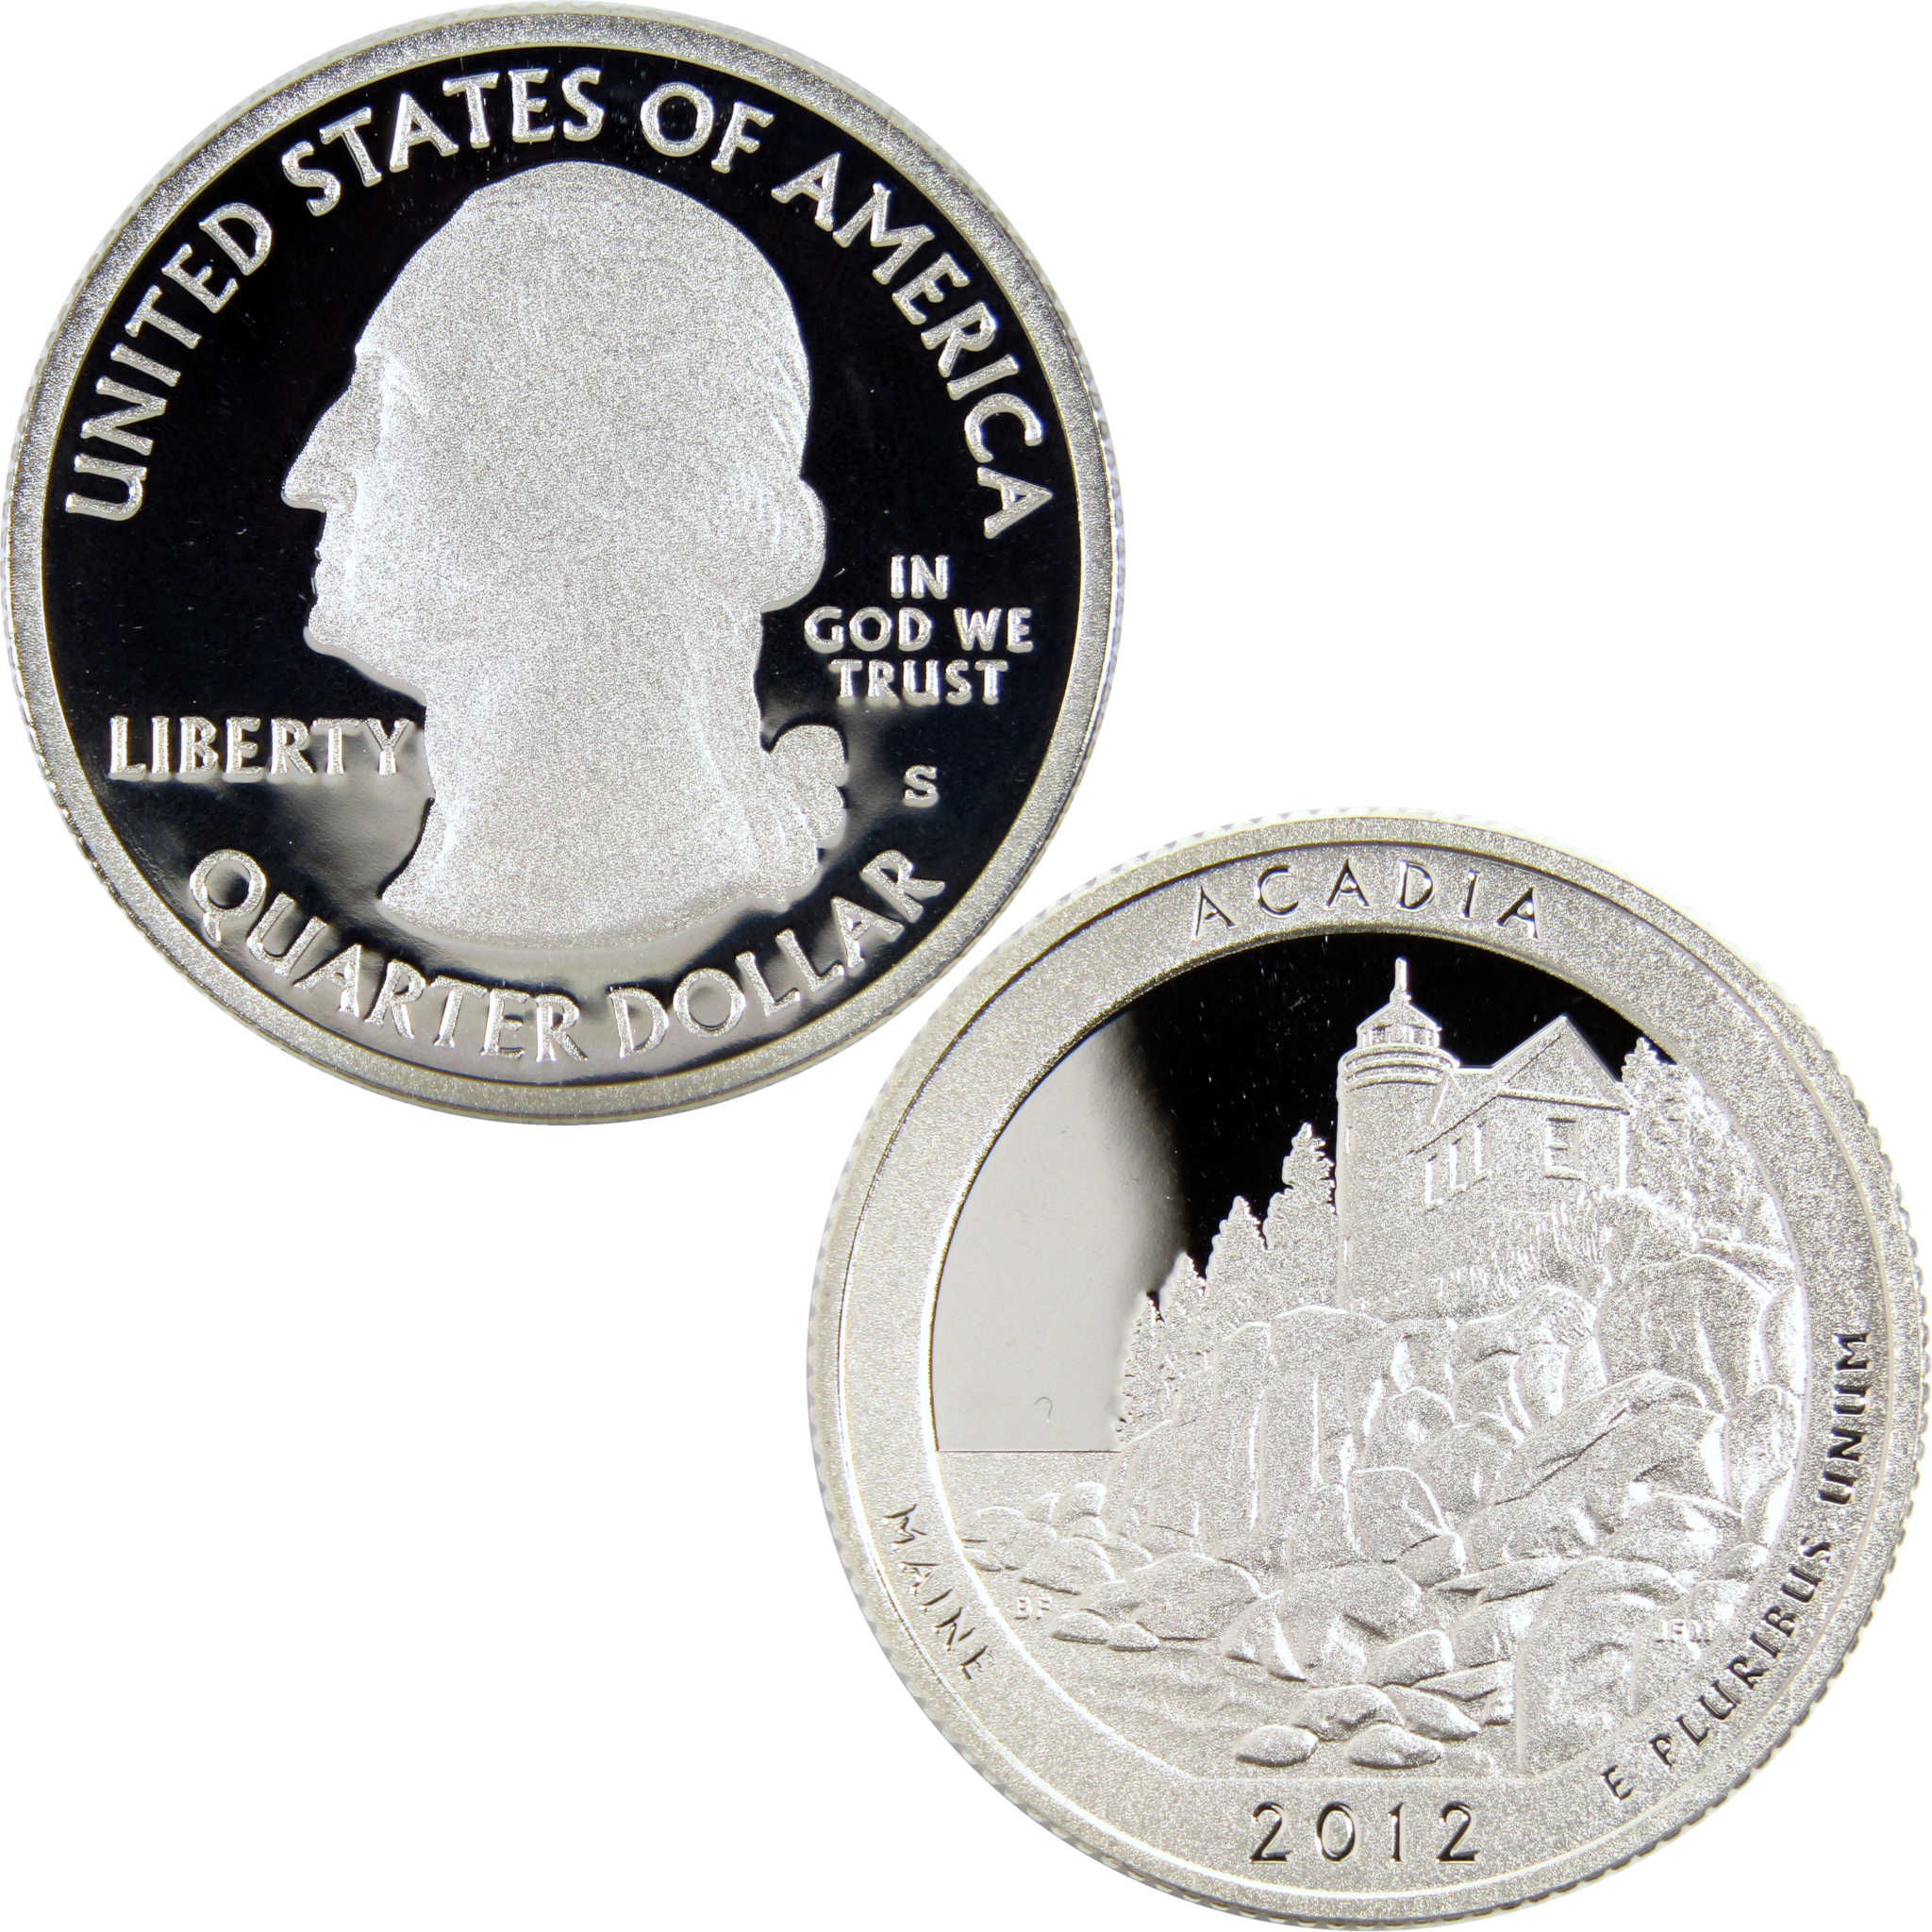 2012 S Acadia National Park Quarter Silver 25c Proof Coin